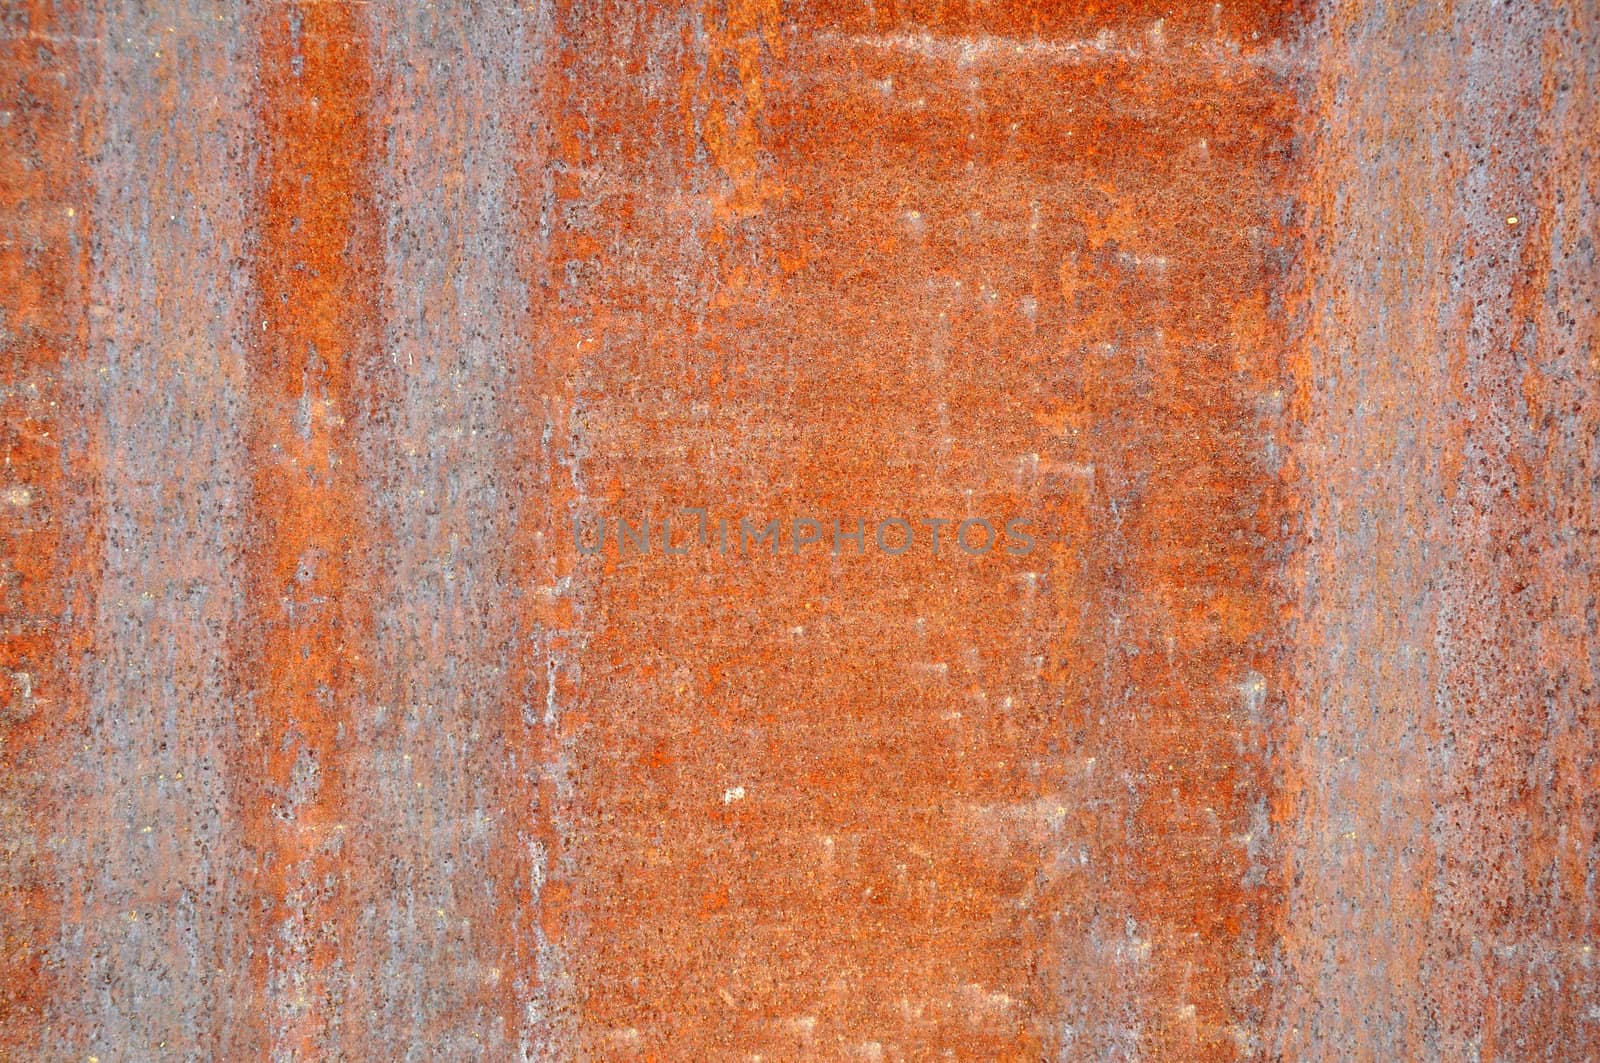 Reddish stone background with texture detail.